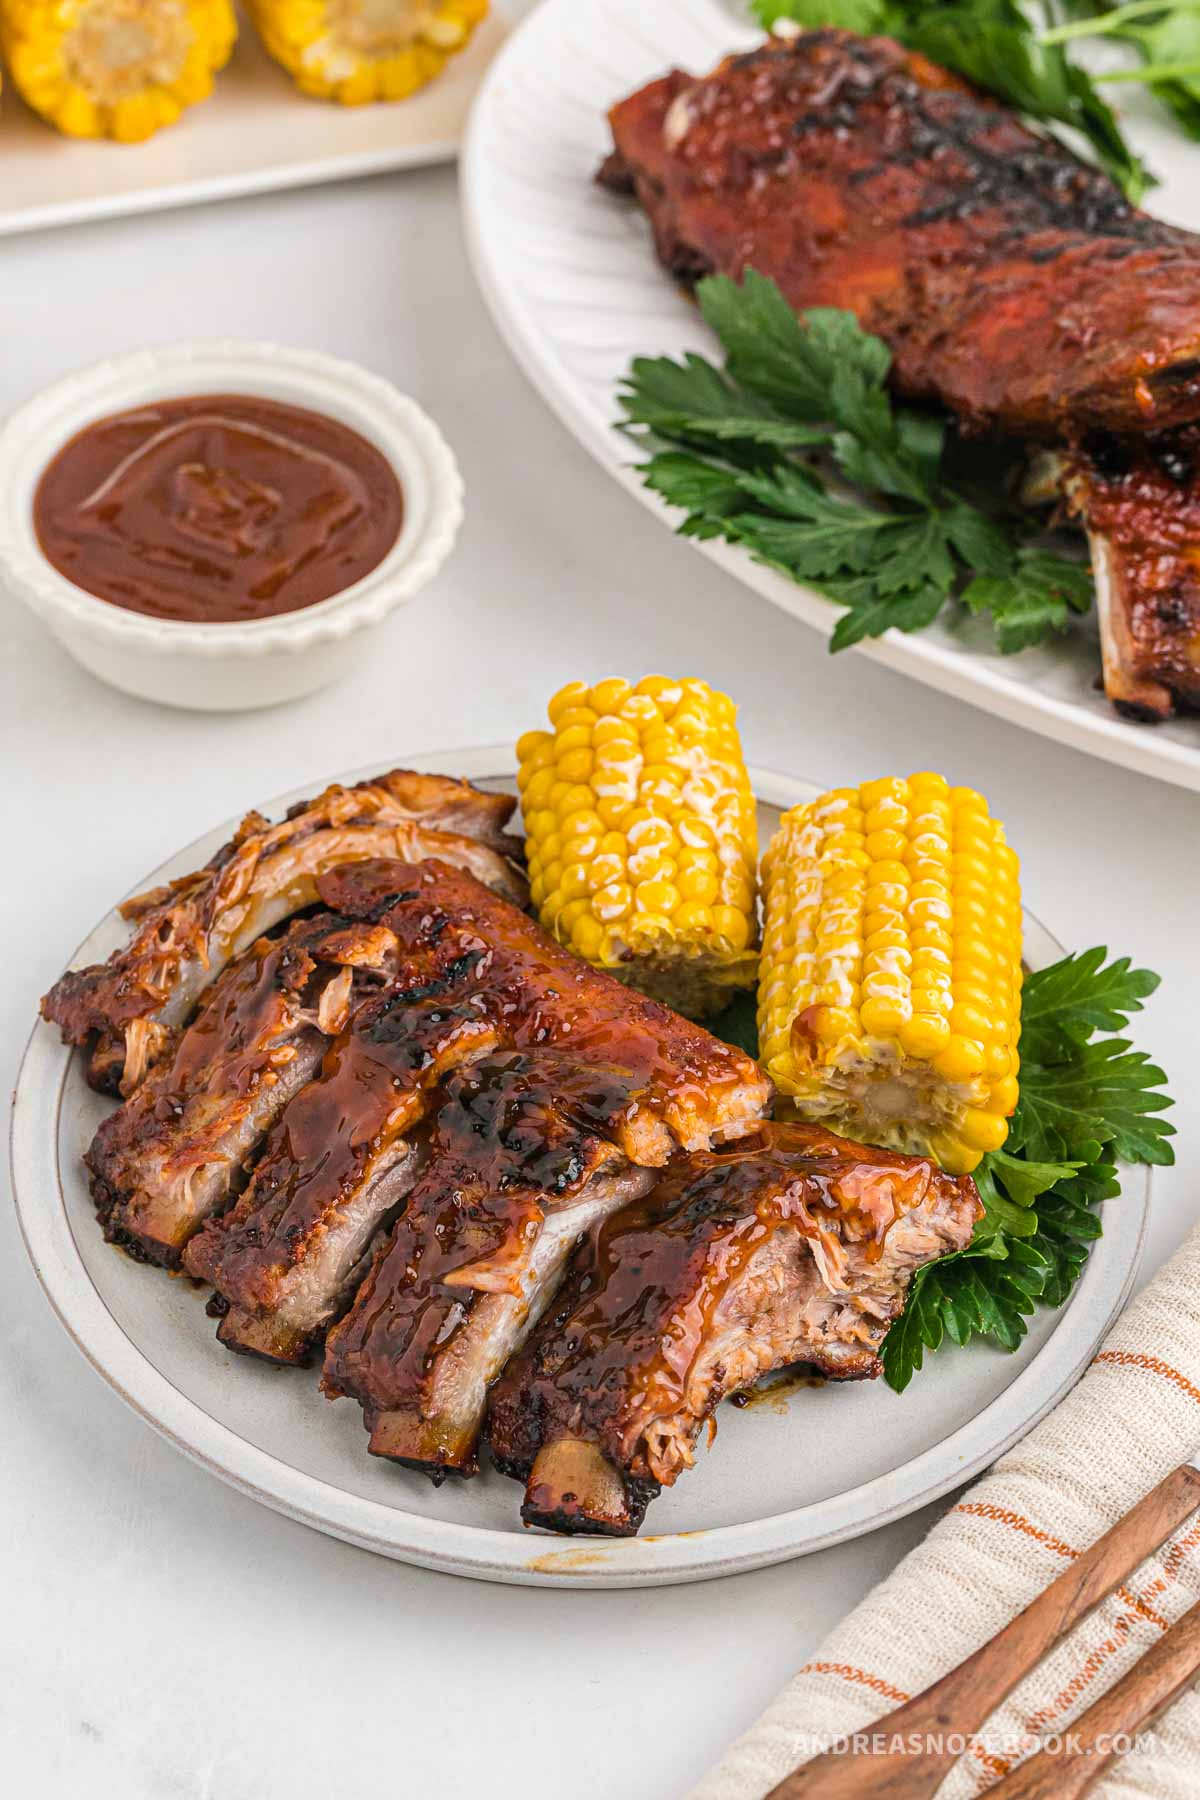 Plate full of barbecue ribs and corn on the cob.